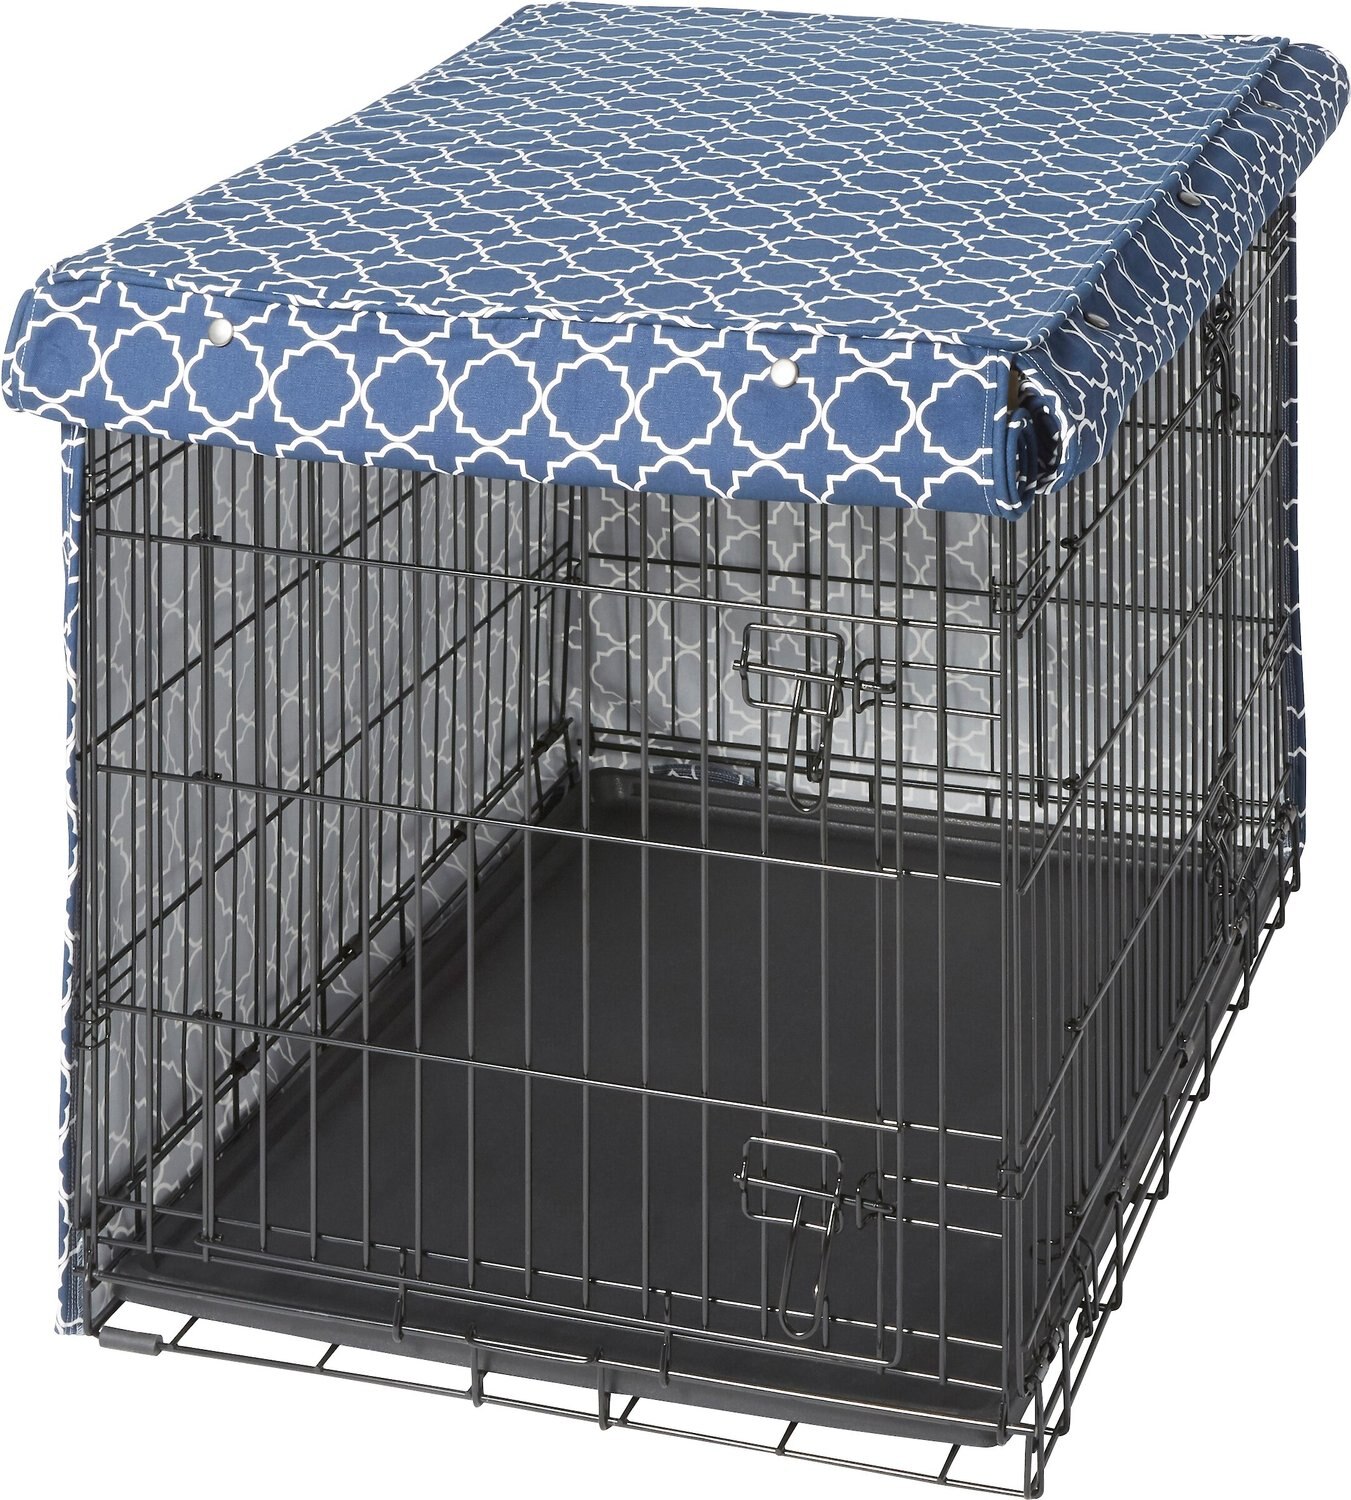 FRISCO Crate Cover, Navy Trellis, 36 inch